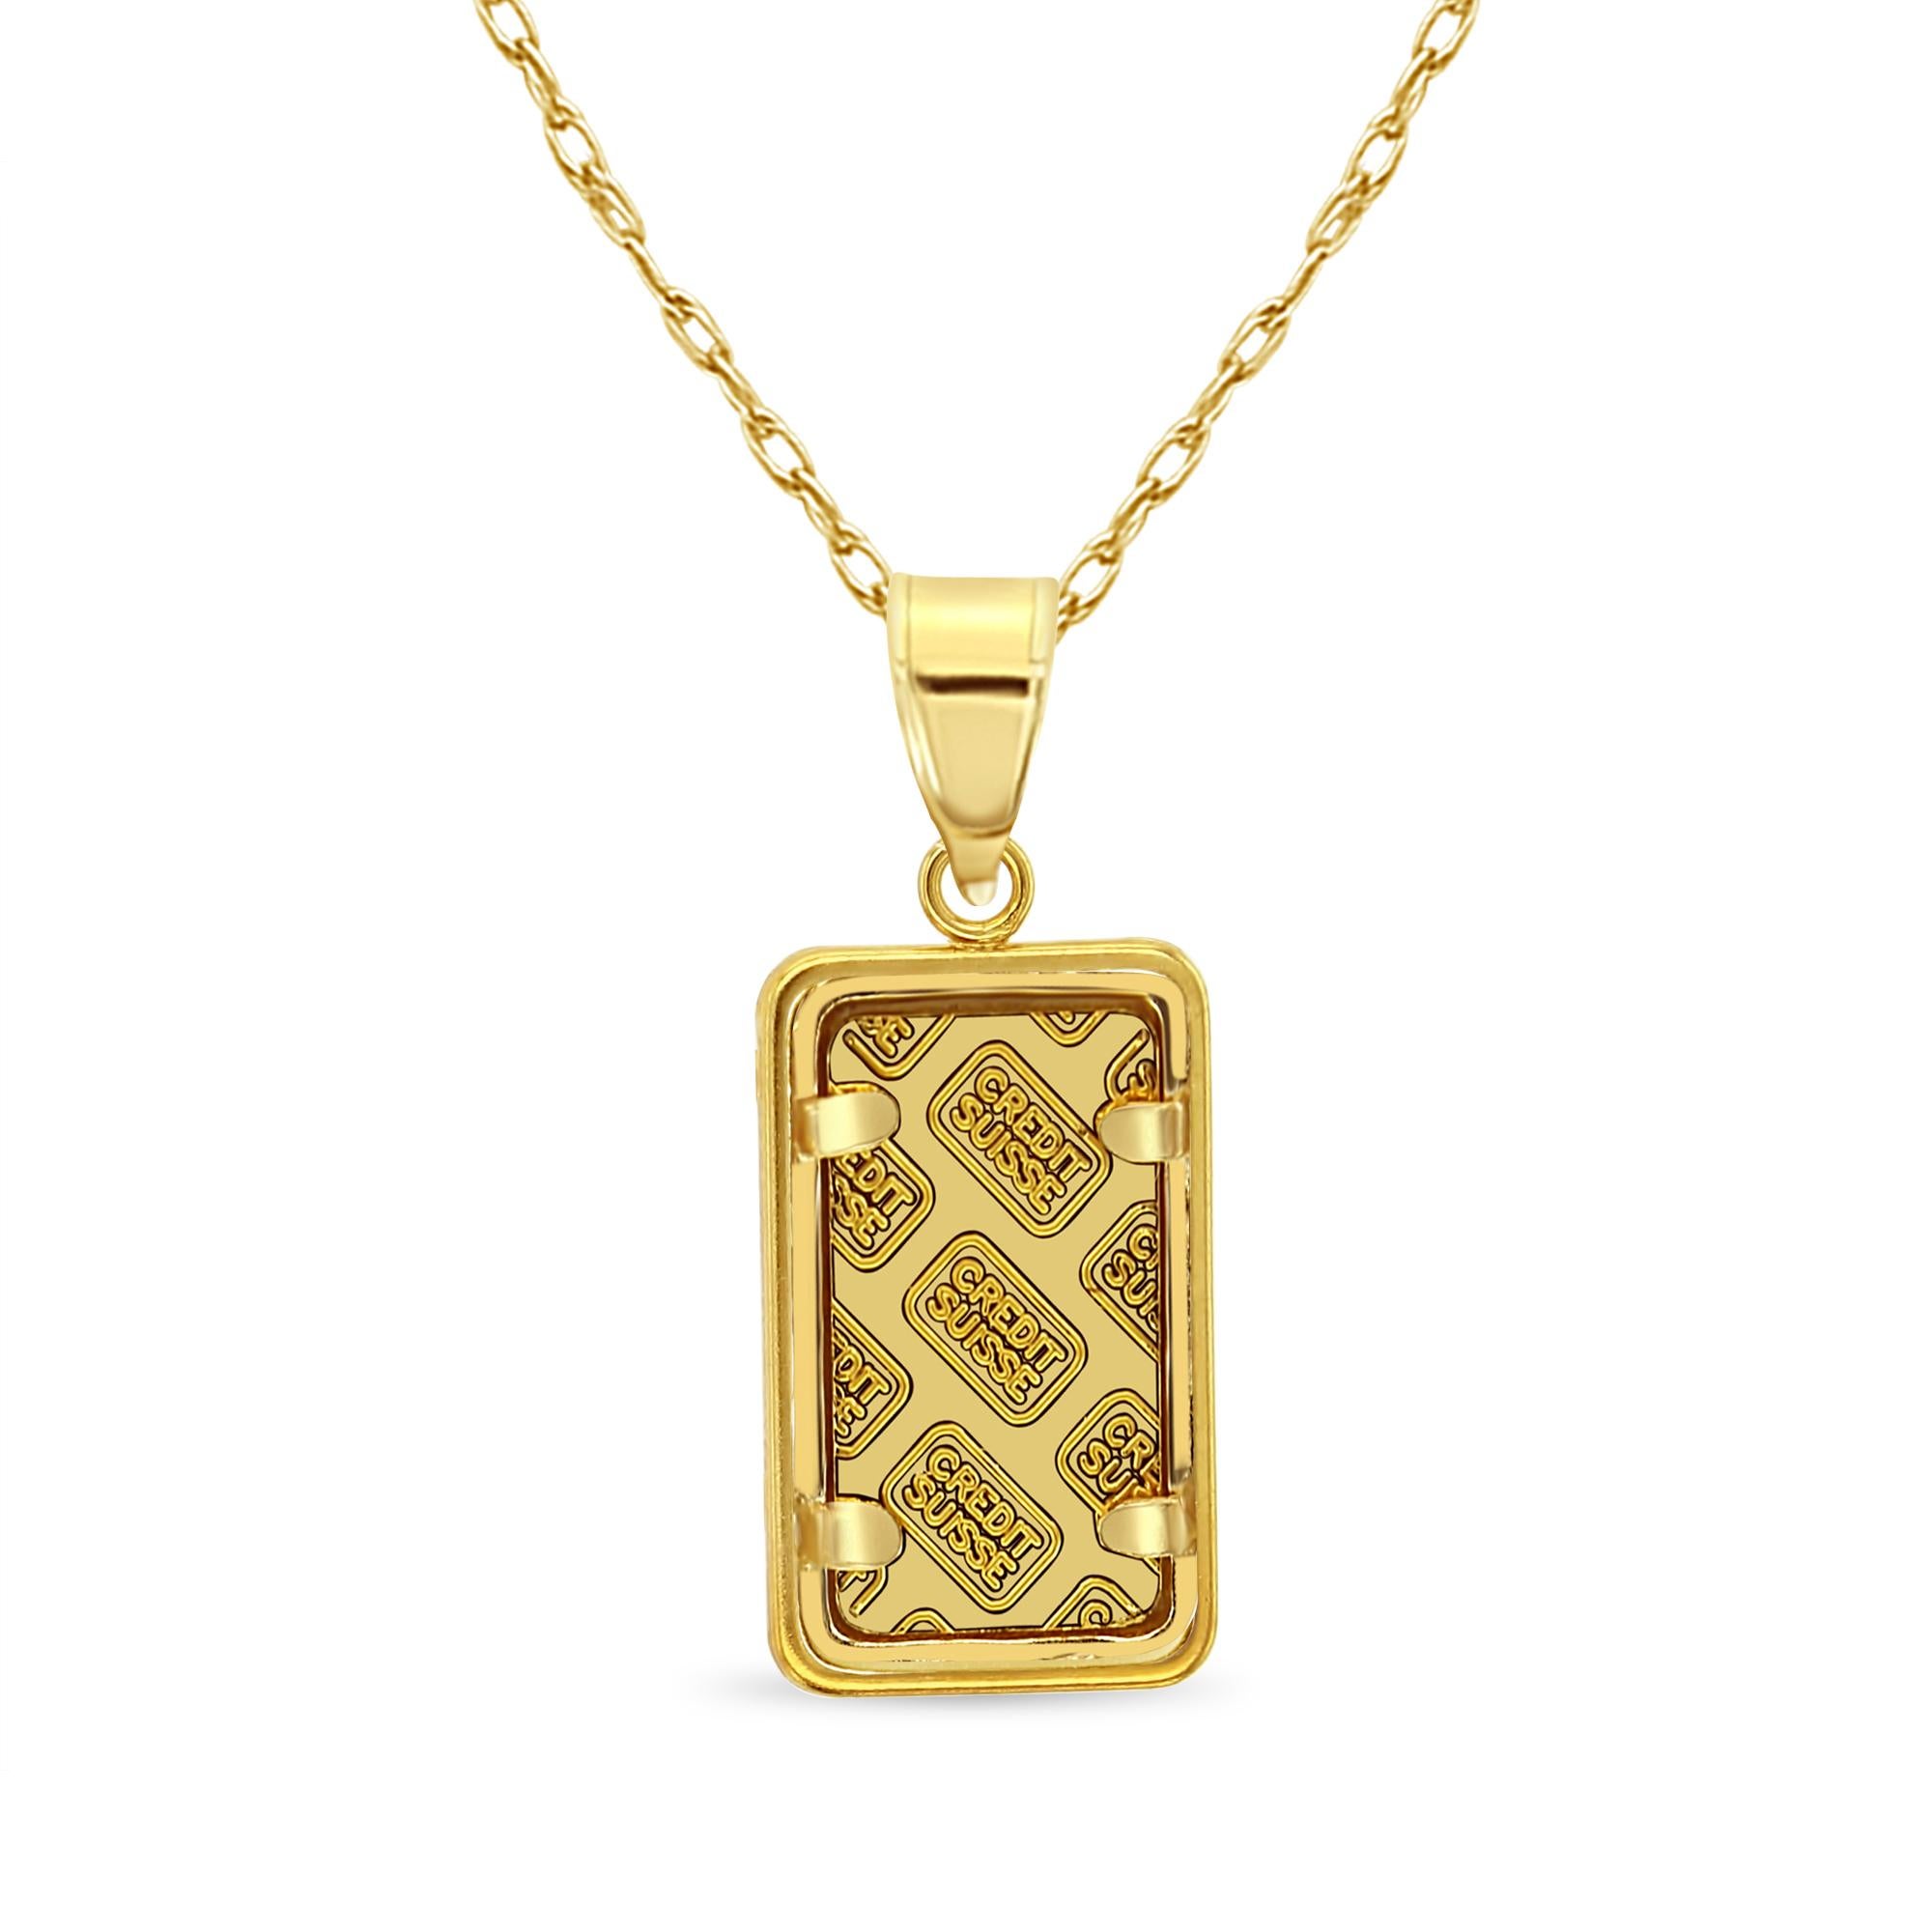 **MADE TO ORDER**

♥ Coin Information ♥
Country: Switzerland
Details: 1 Gram Credit Suisse Gold Bar
Purity: .999
Metal Weight: .03215 Troy Ounce
Obverse: Credit Suisse logo, weight, metal content and purity
Reverse: Credit Suisse block logo

♥ Bezel